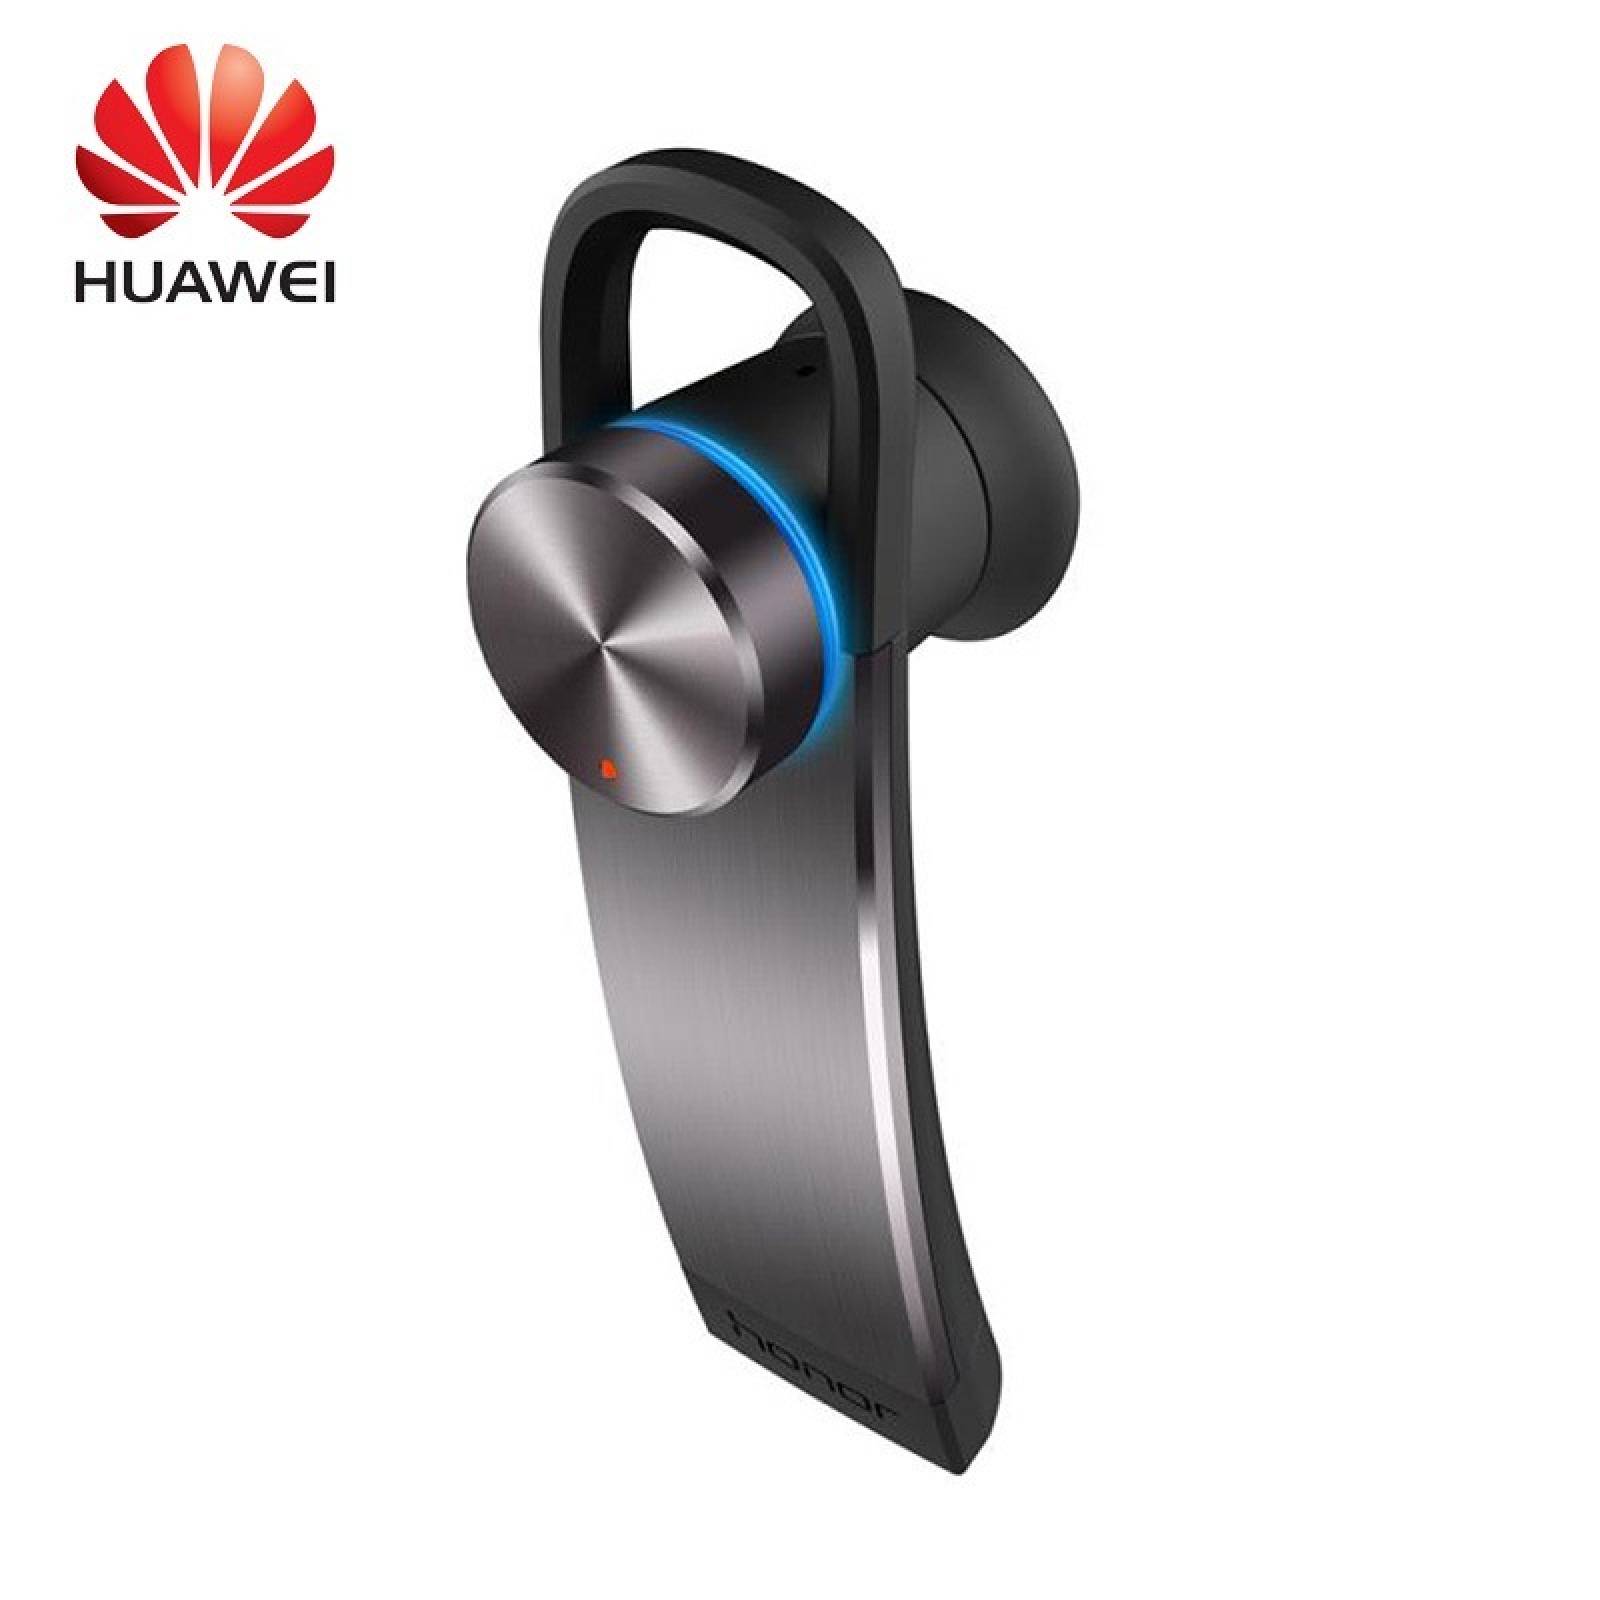 Manos Libres Huawei Bluetooth Headset Whistle Am07c